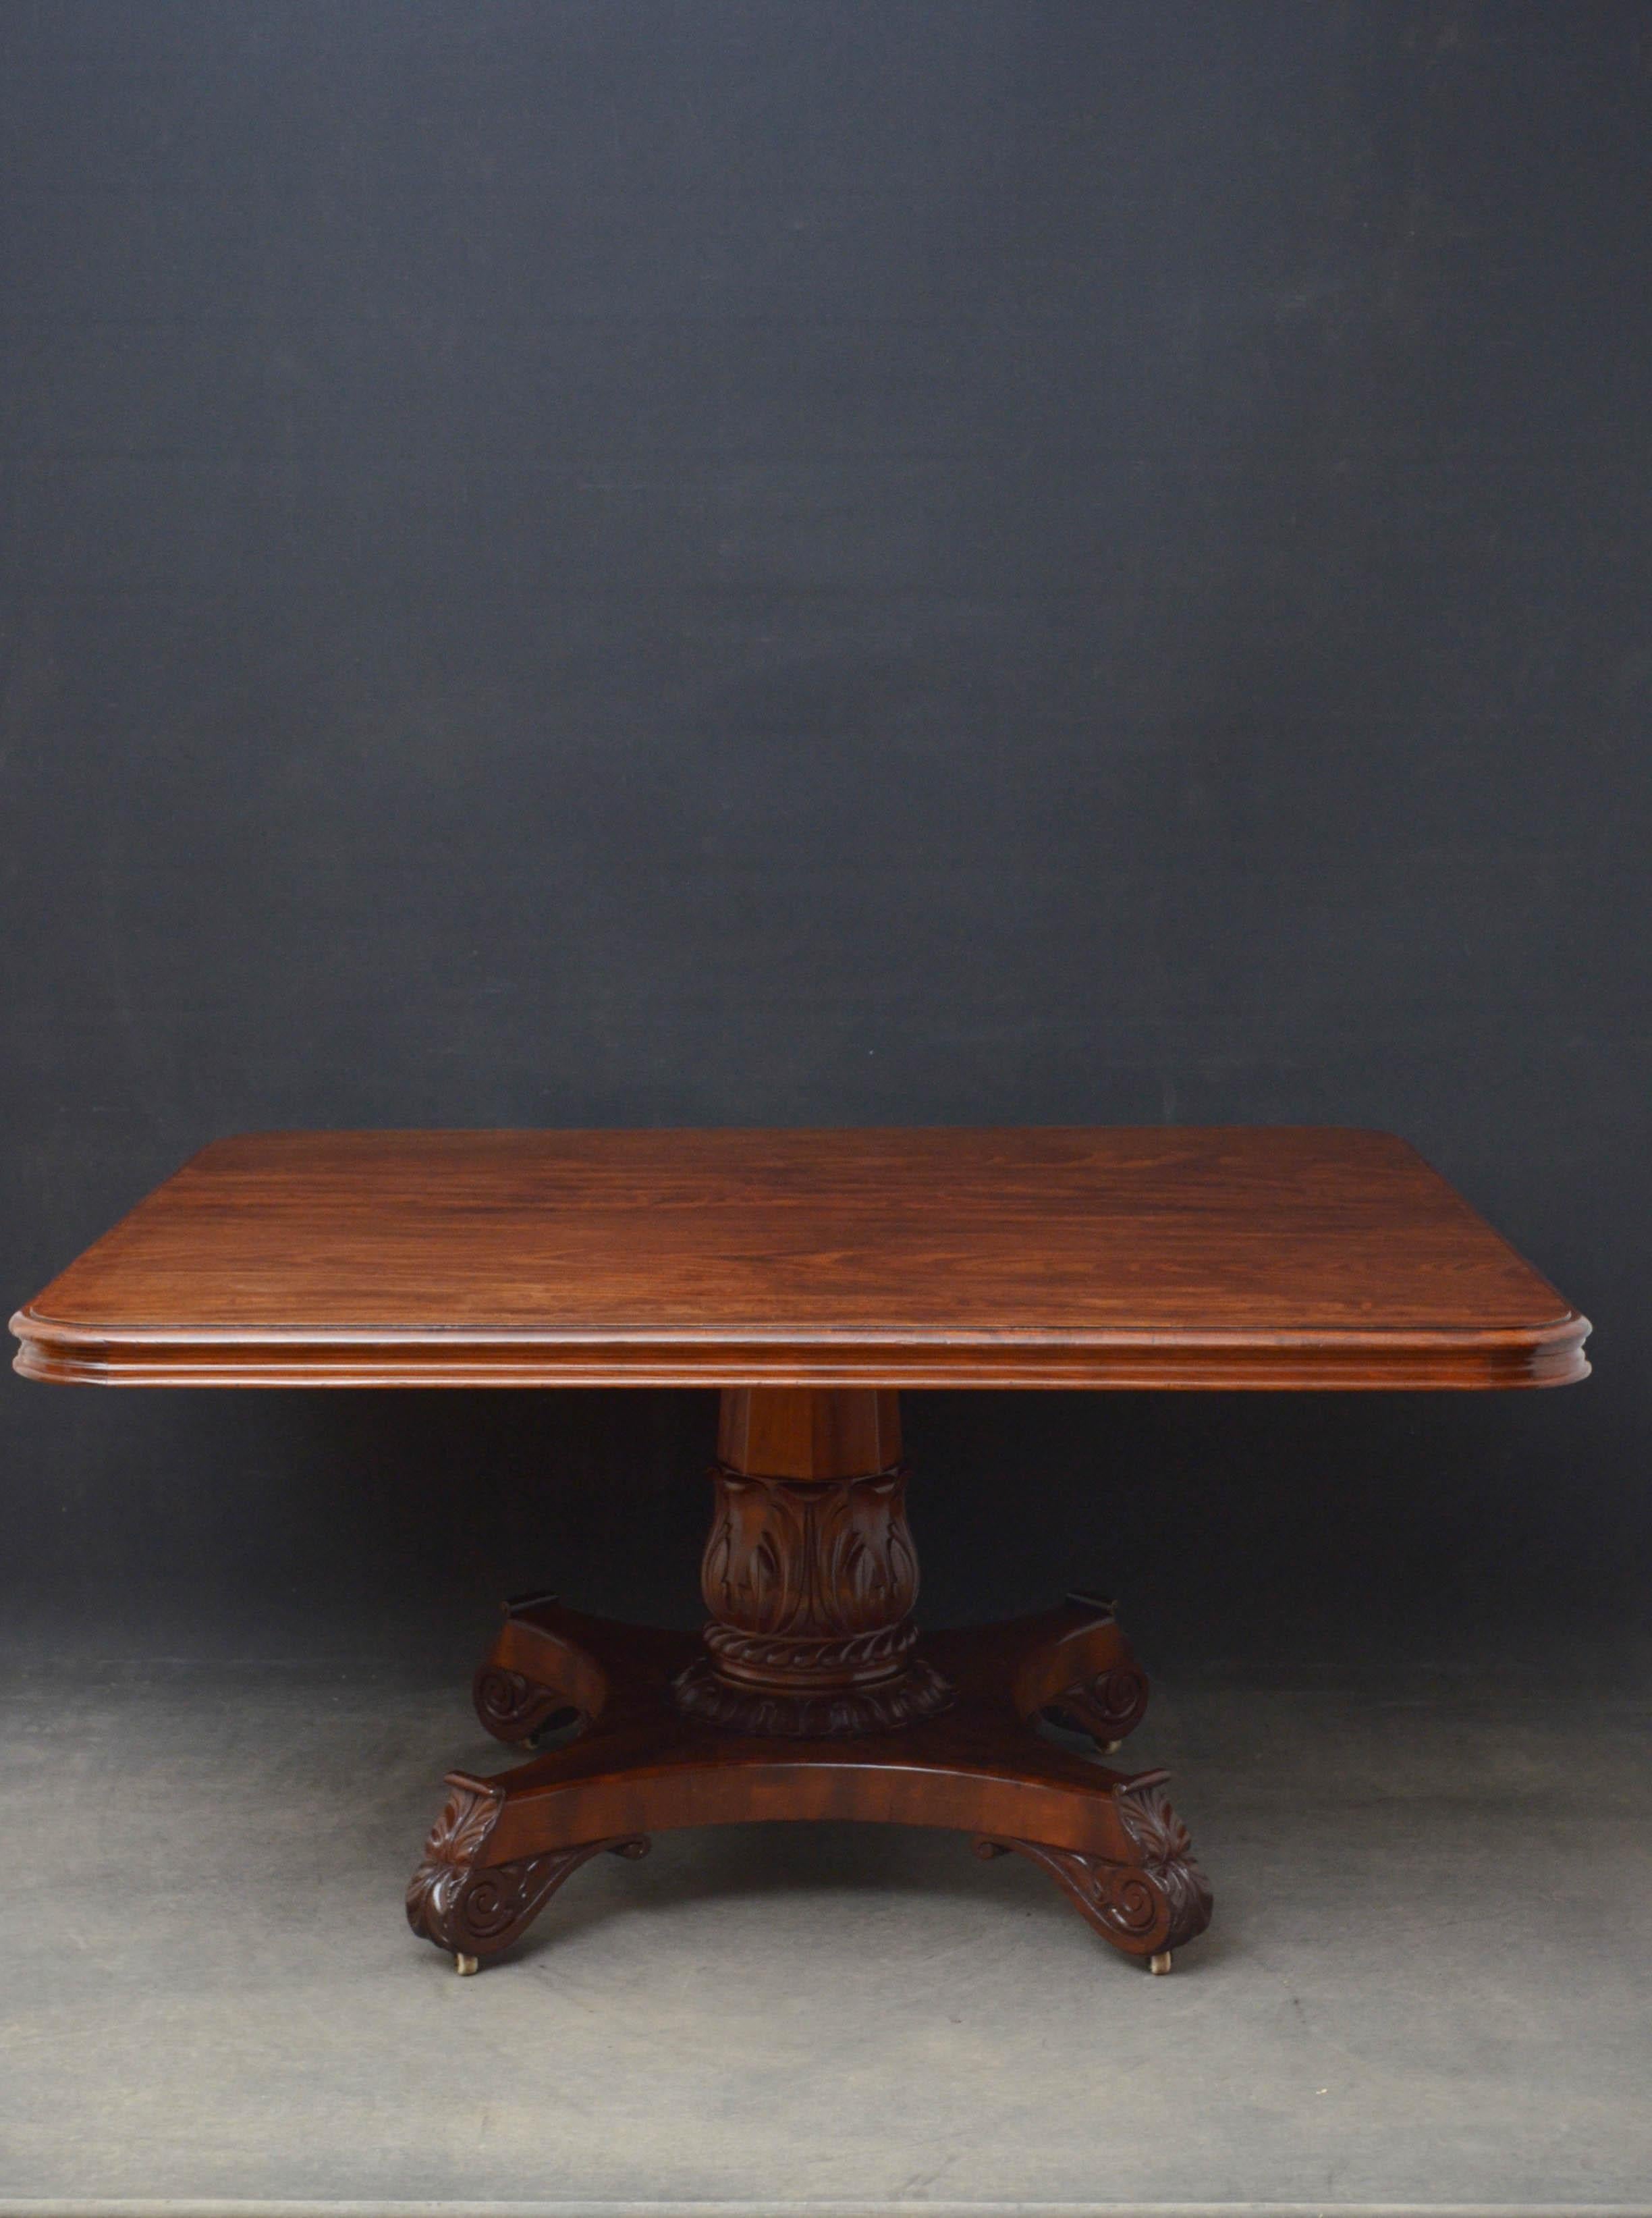 Sn4860, superb William IV mahogany dining or center table, having solid, figured mahogany tile top with moulded edge and shaped frieze above substantial, flat faceted column with acanthus leaf carved decoration and tulip carved collar terminating in